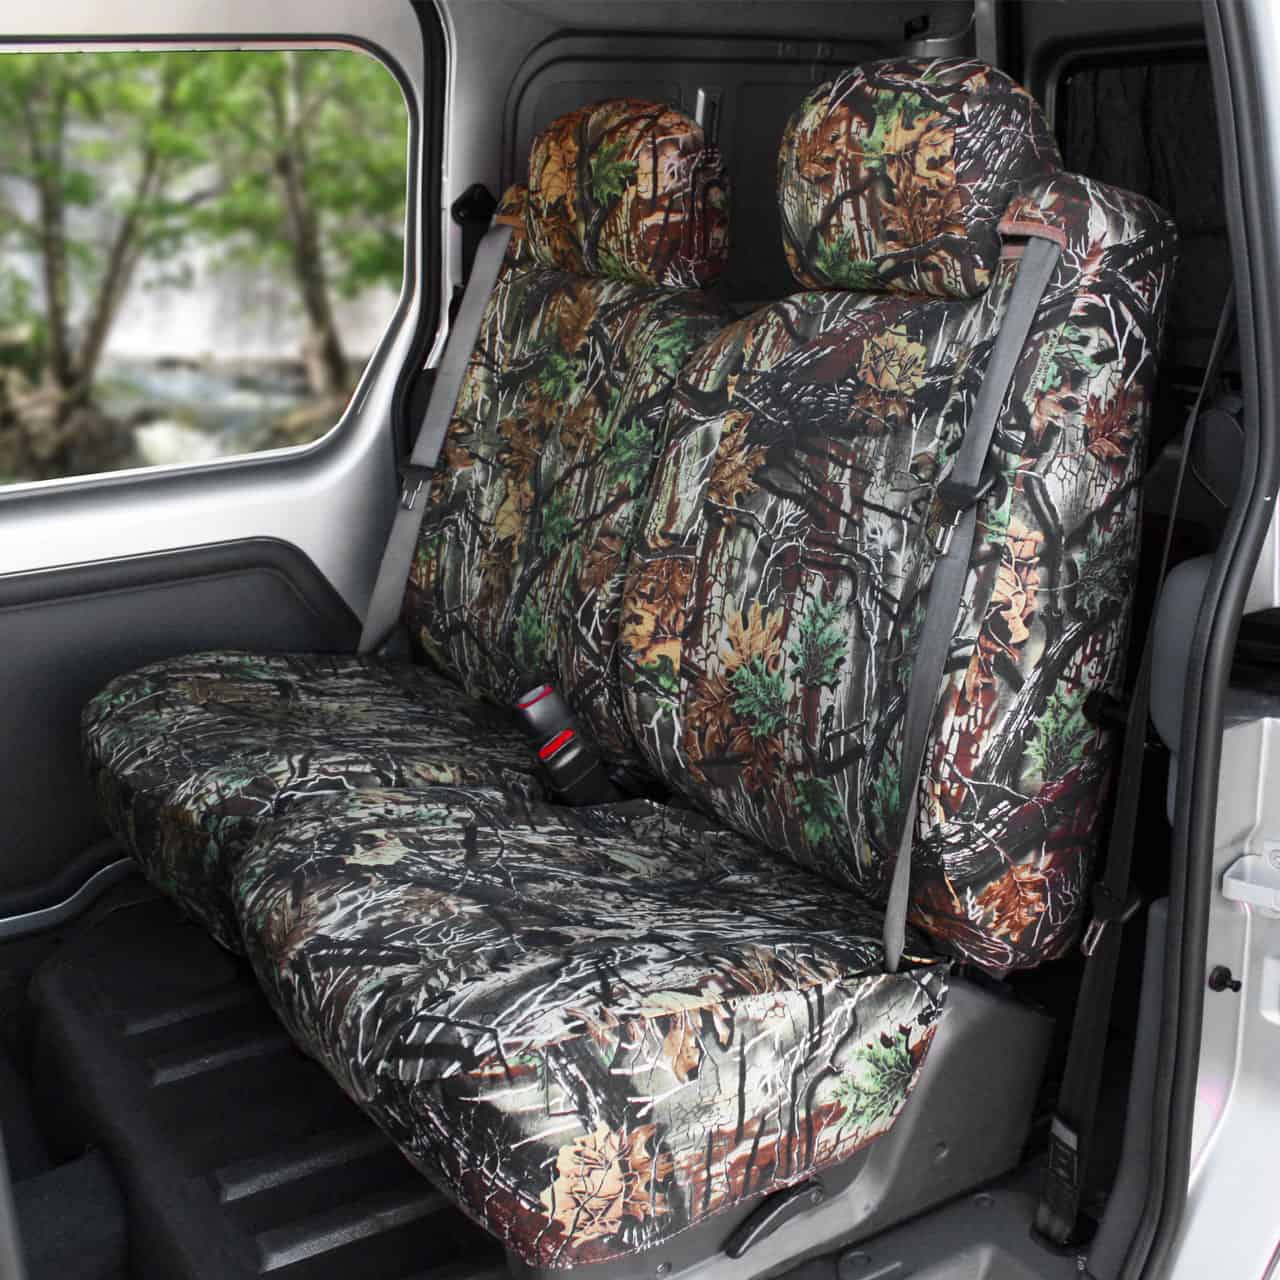 Sport Bucket Velor Conceal Camo Seat Covers Durafit Seat Covers T955-Conceal Camo Pair Toyota Tacoma TRD Front 